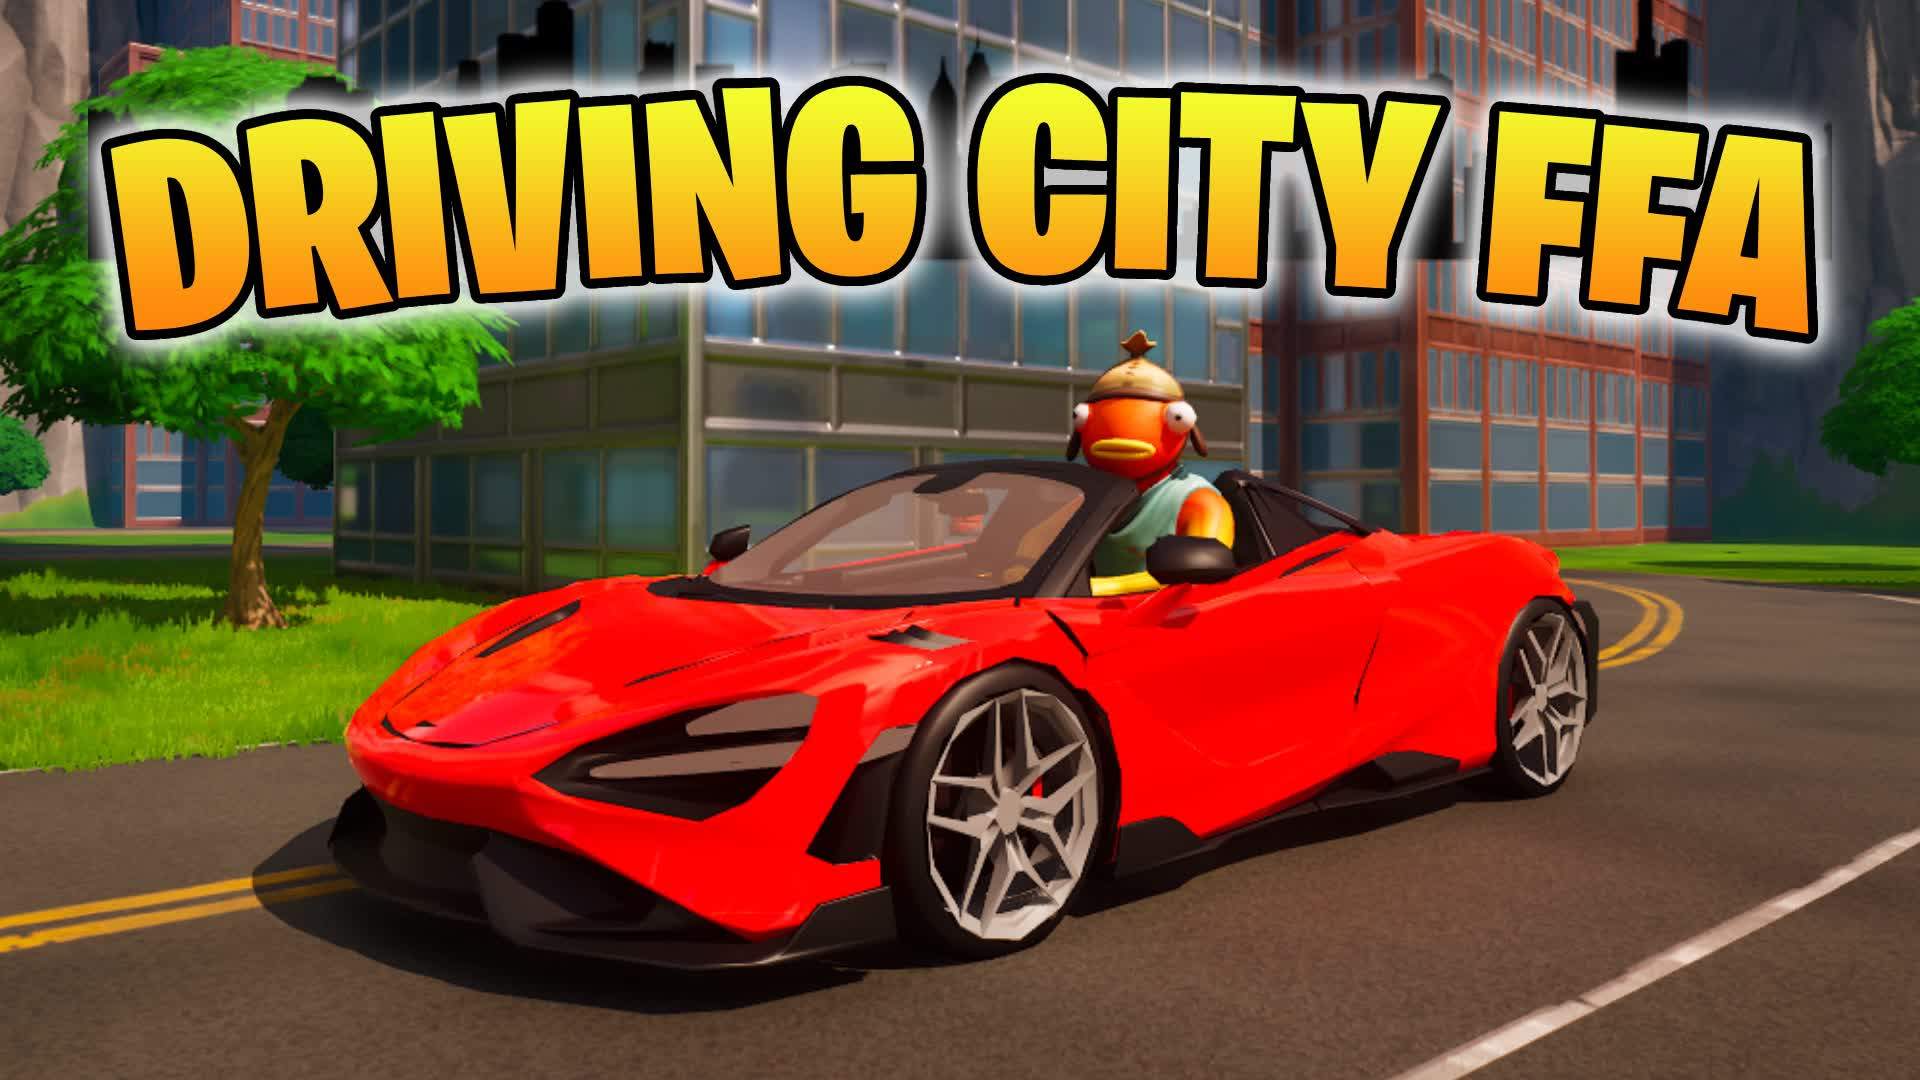 🚗 DRIVING CITY FFA ⭐ ALL WEAPONS